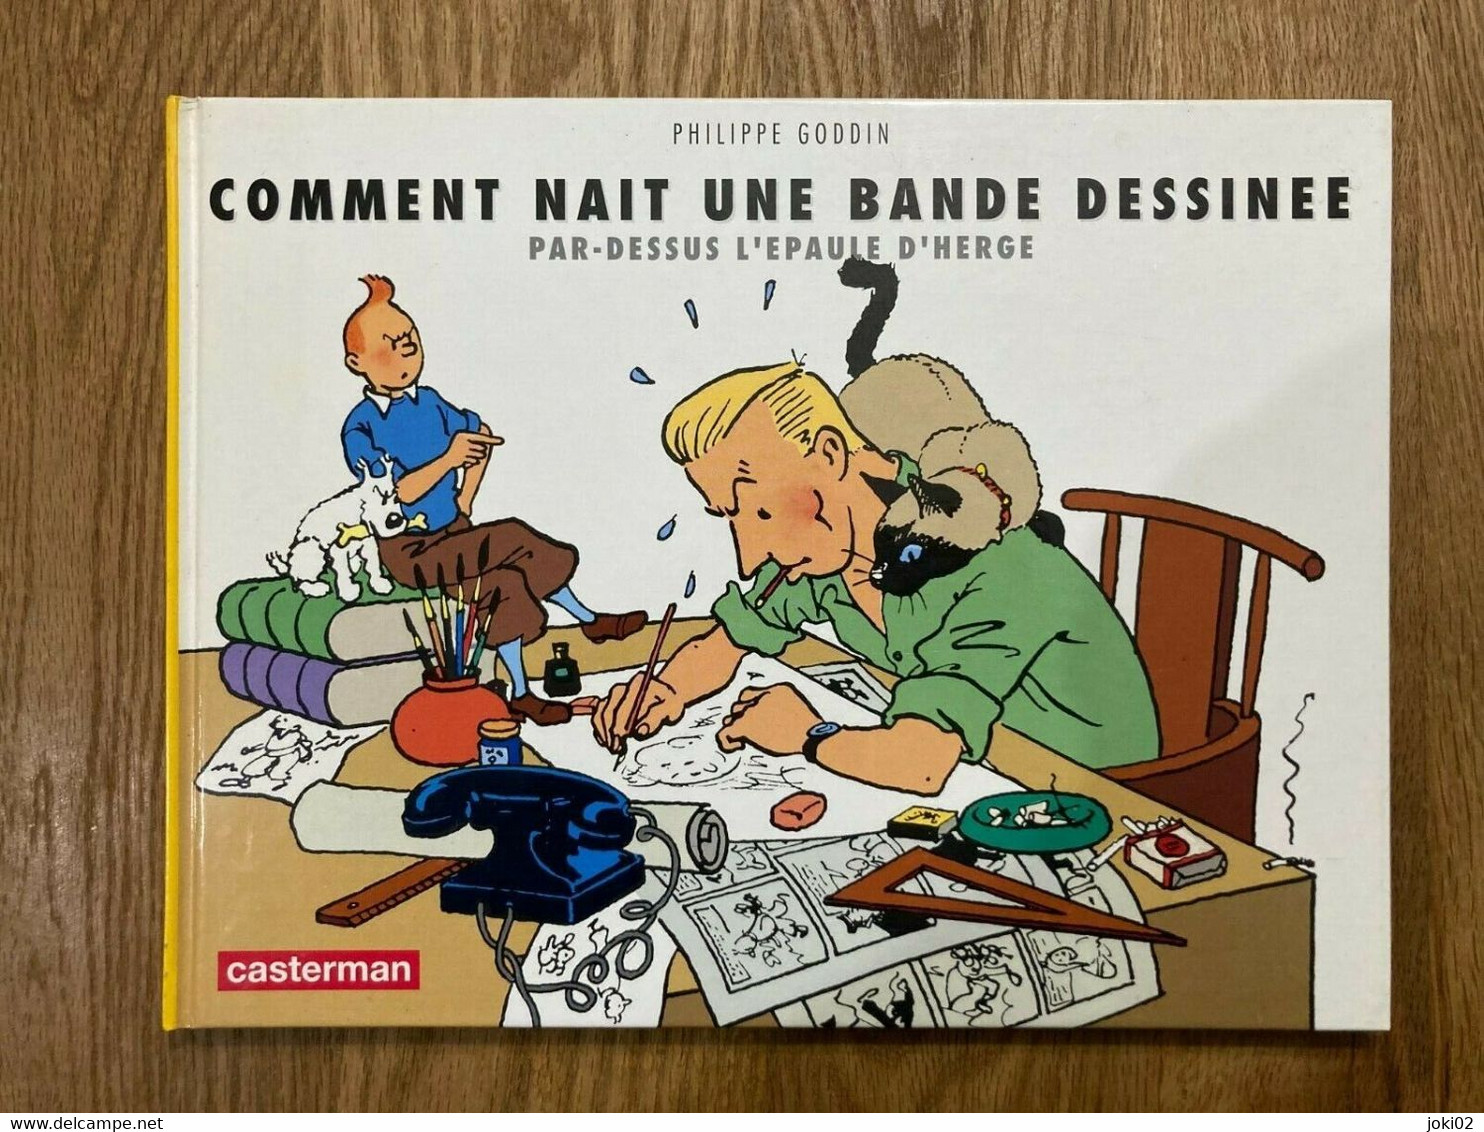 tintin ,hors commerce- rare affiche d expo